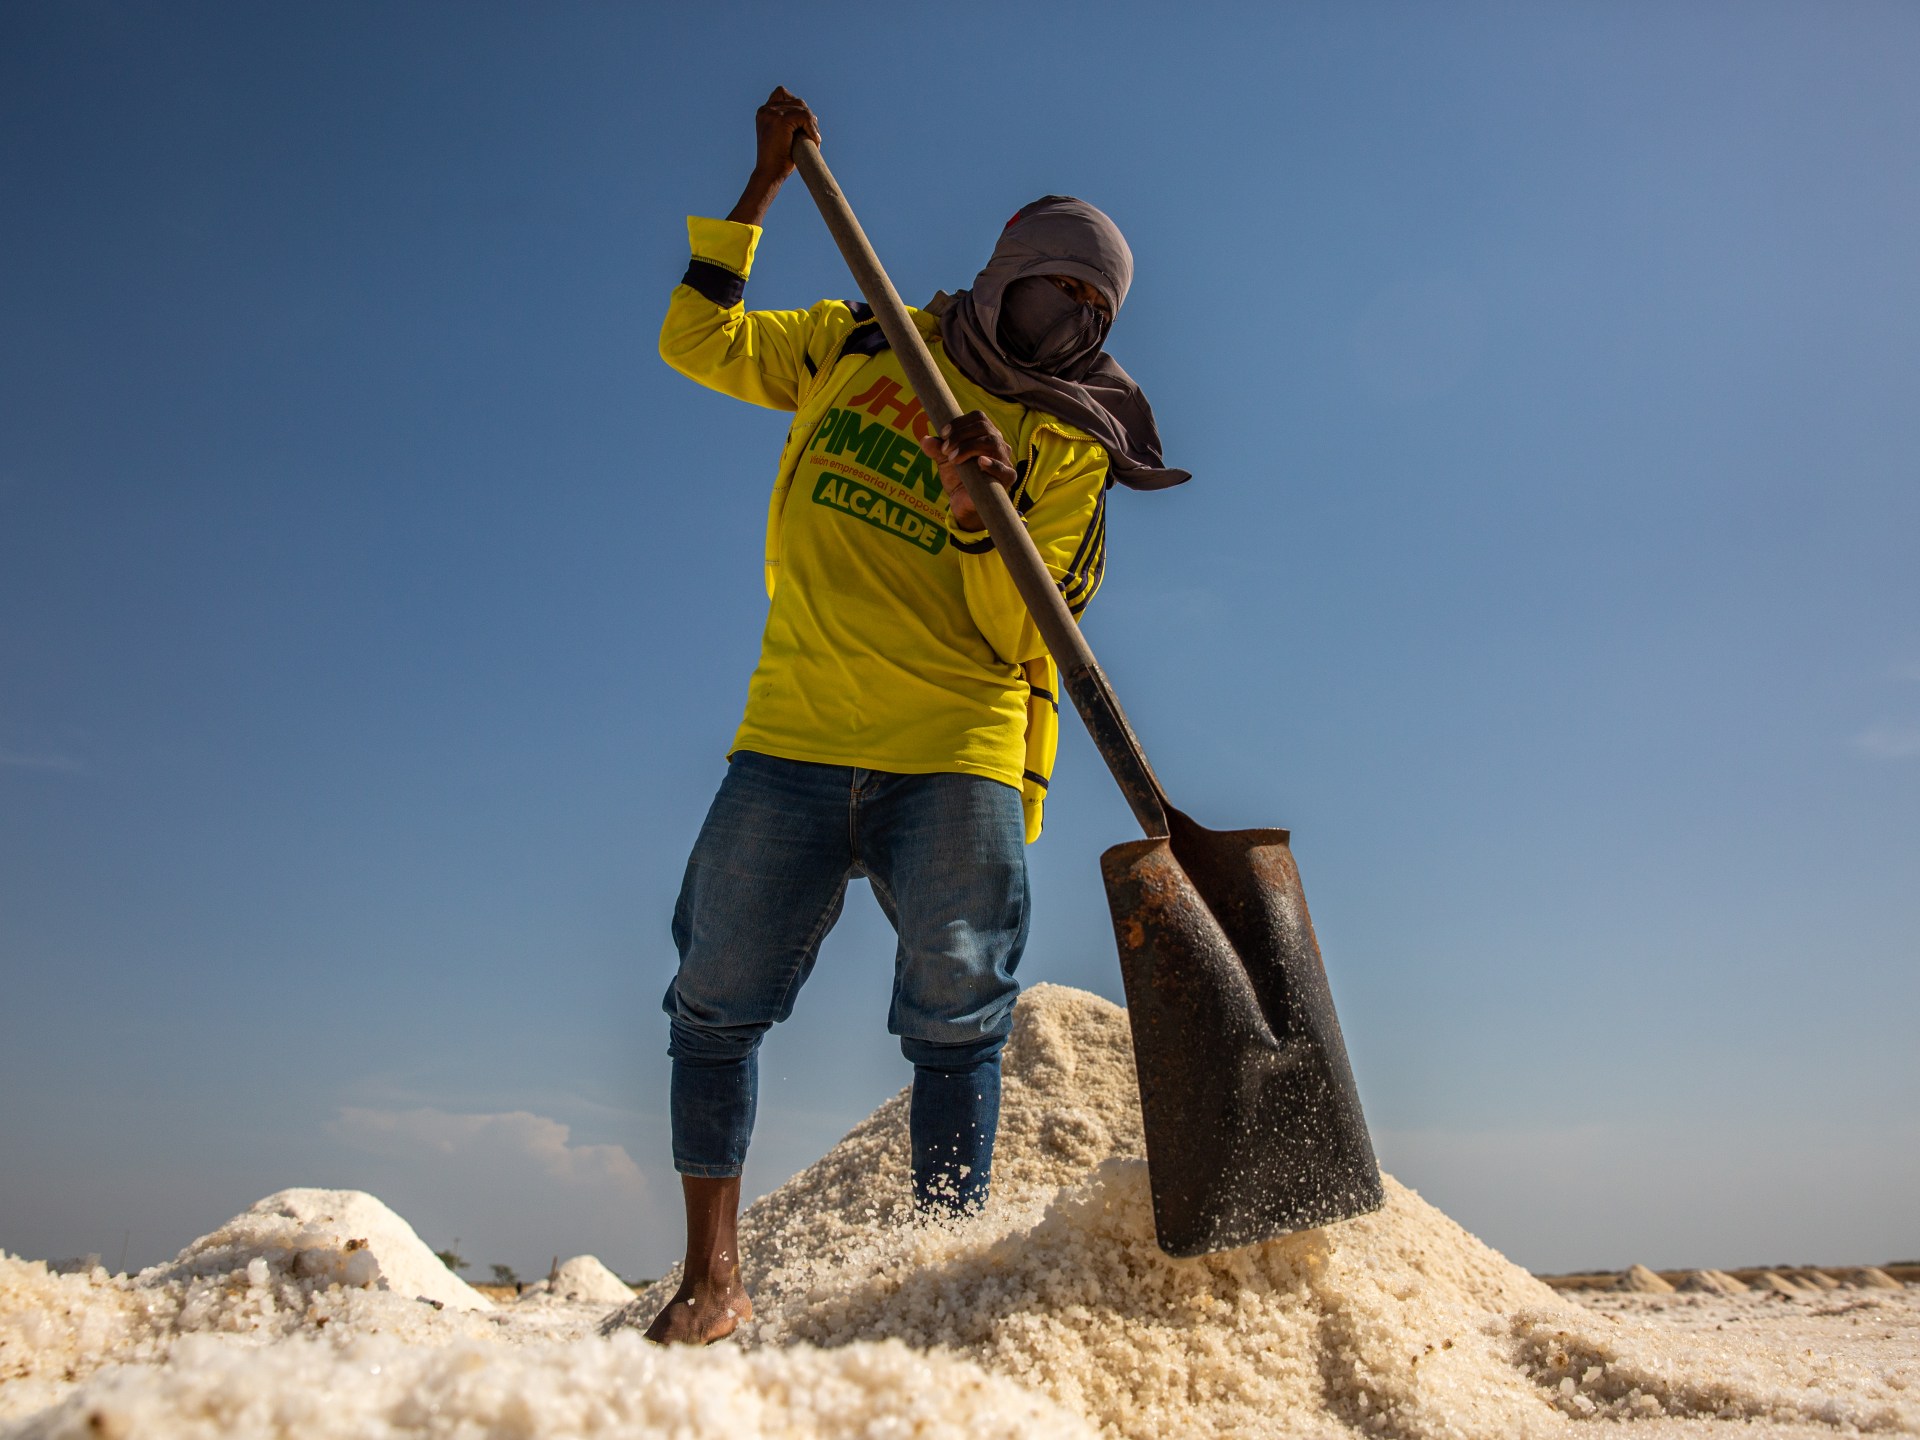 Can salt mitigate hunger? Inside the salt flats of La Guajira, Colombia | Business and Economy News